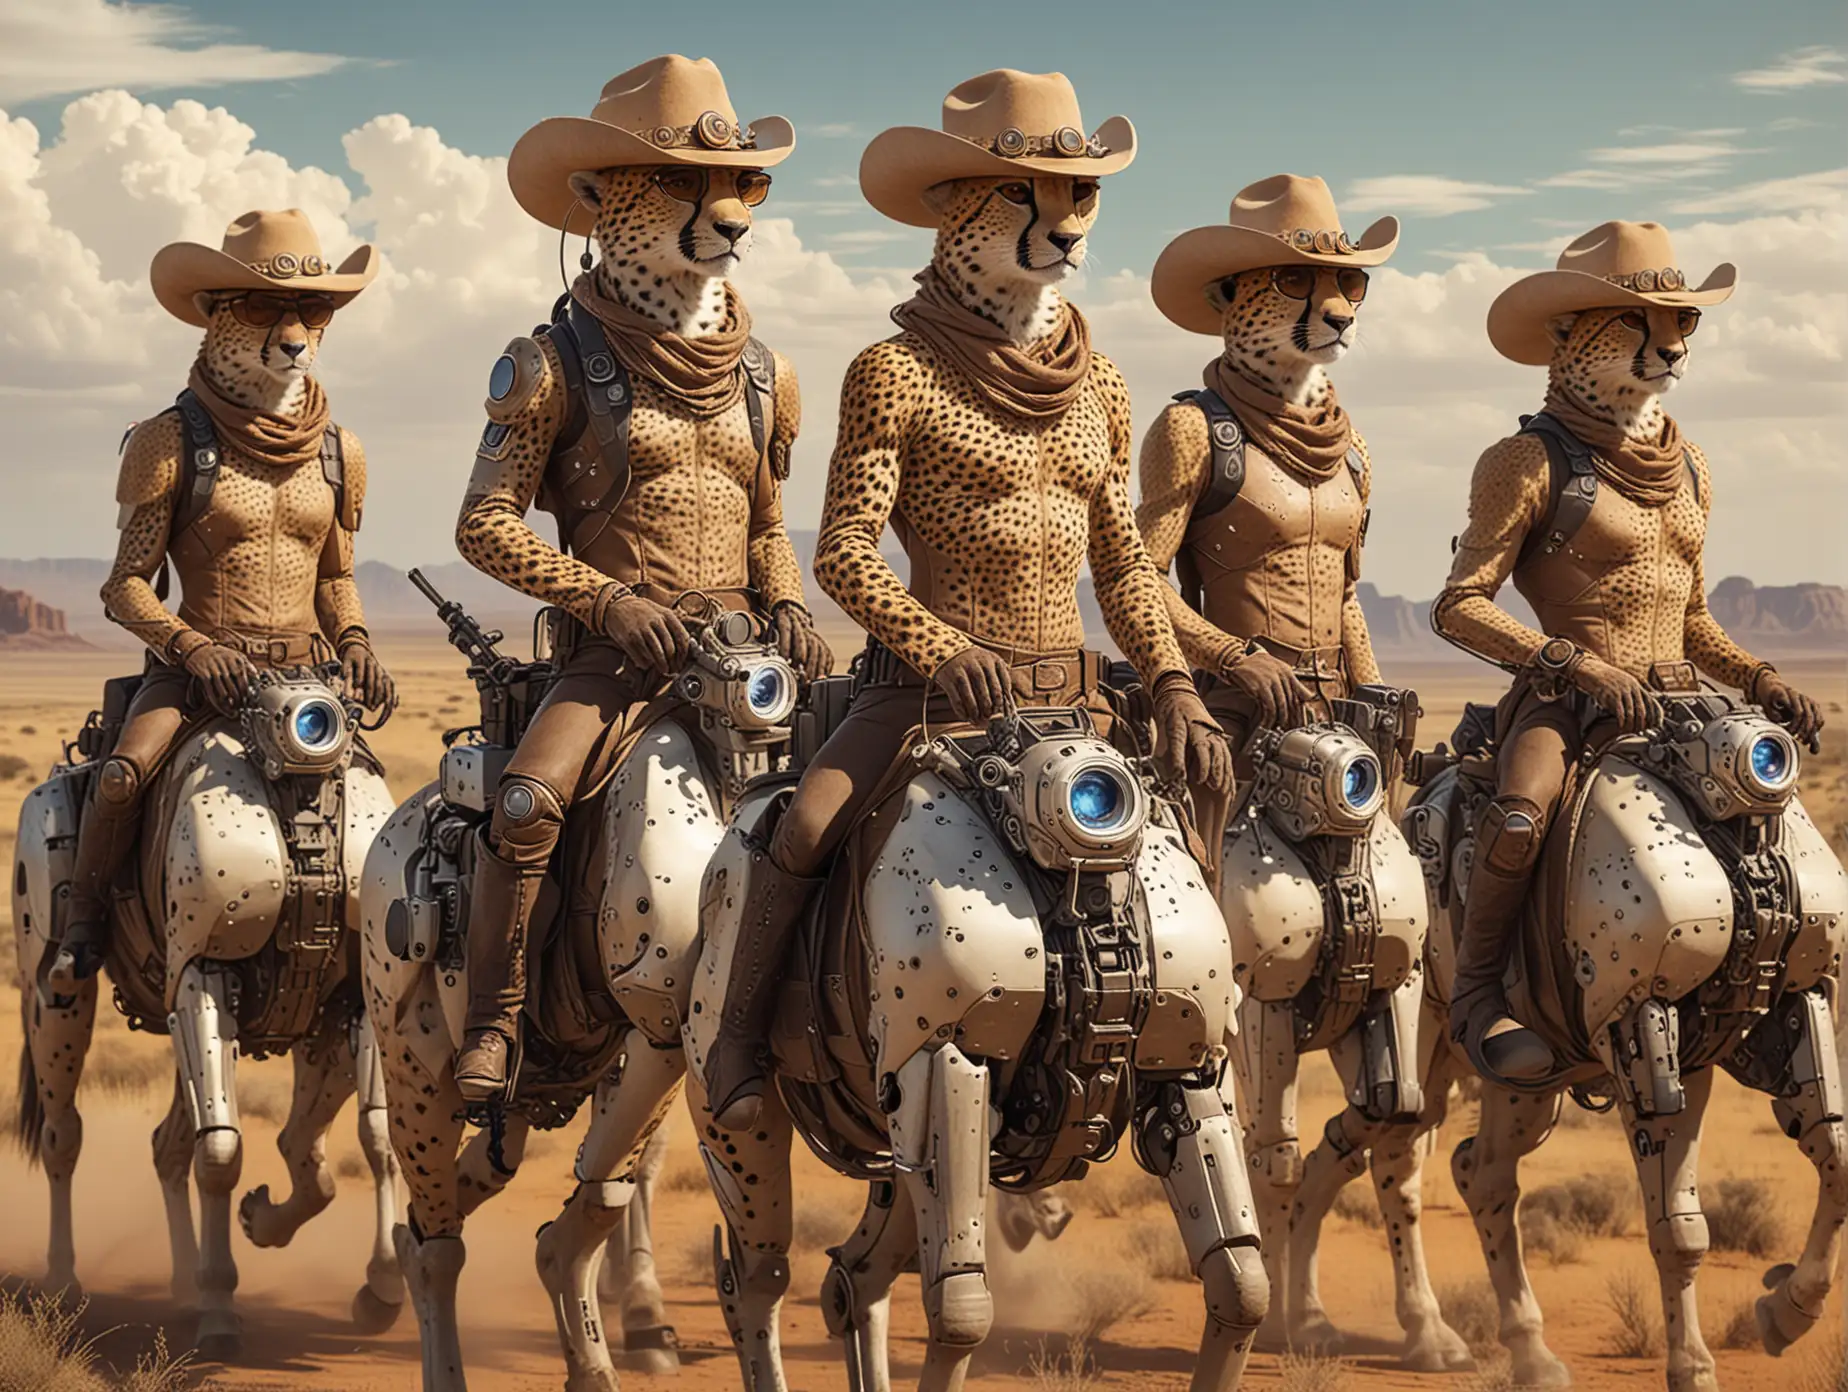 a futuristic group of cheetah-human cowboys with cowboy tech-hats and tech-binoculars on their head. They are riding on big robotic-tech-horses. The background is savanna with cyber lions.